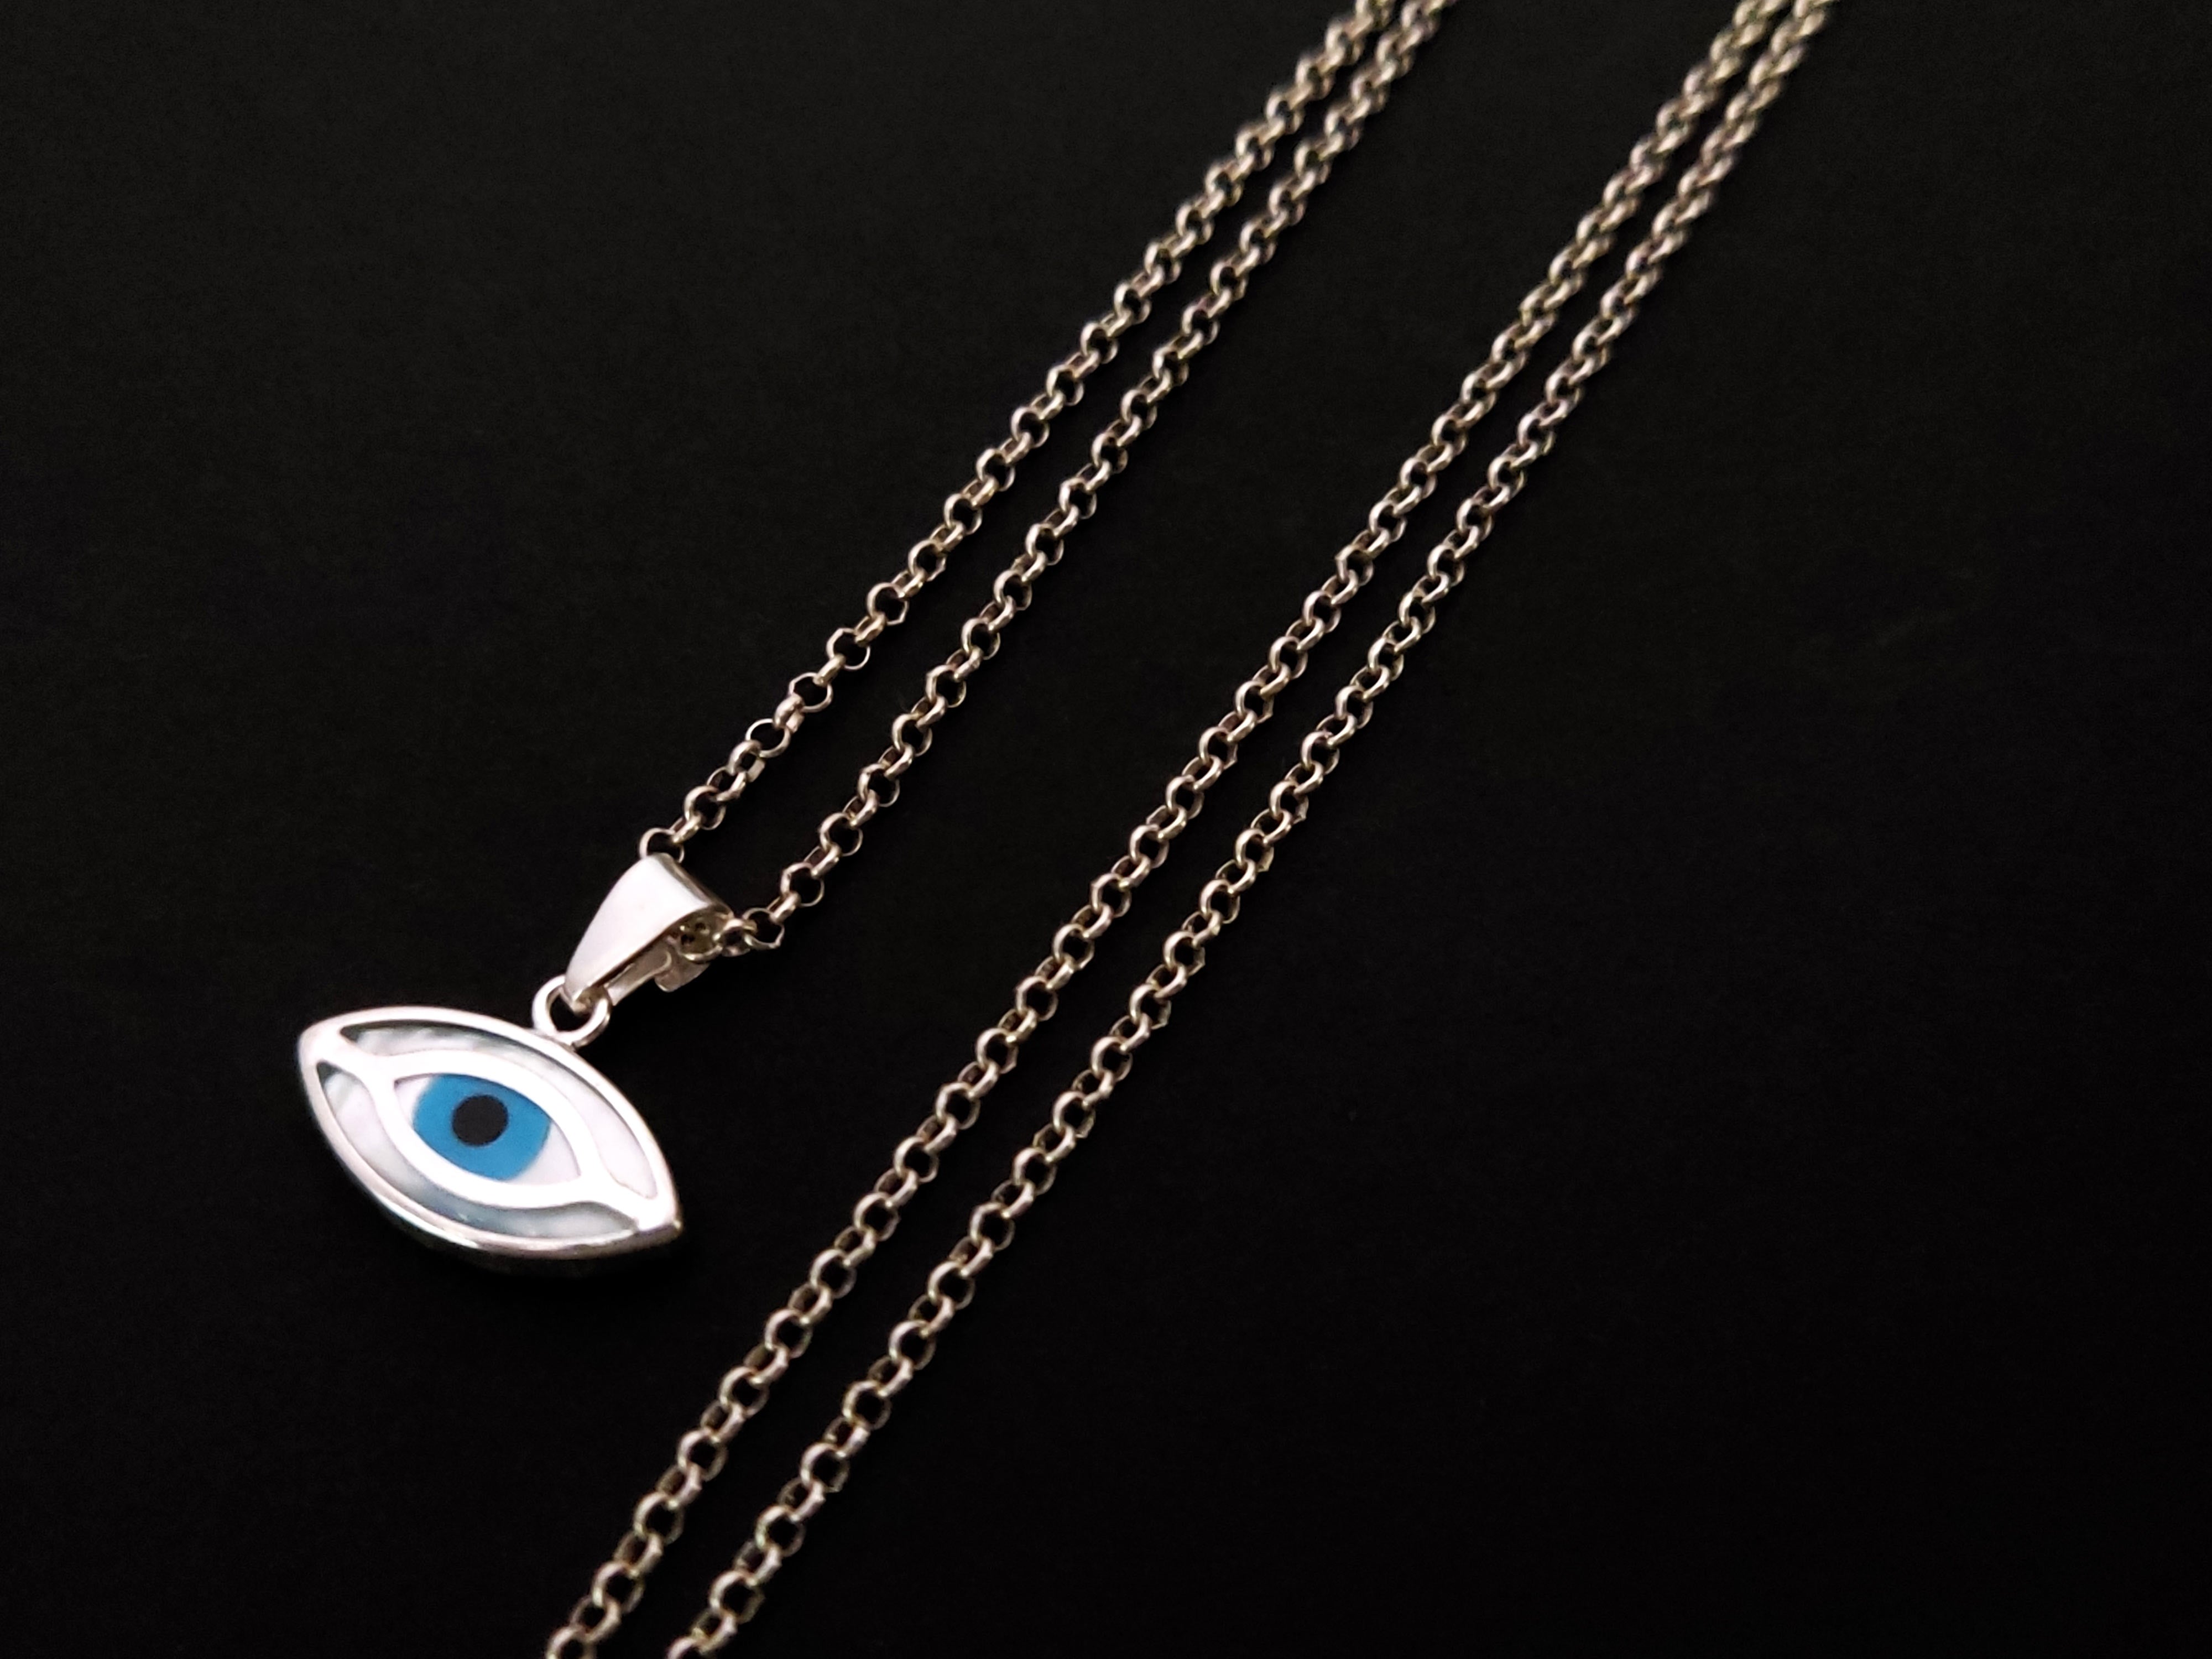 Buy Urja Evil Eye Necklace In Gold Plated 925 Silver from Shaya by CaratLane